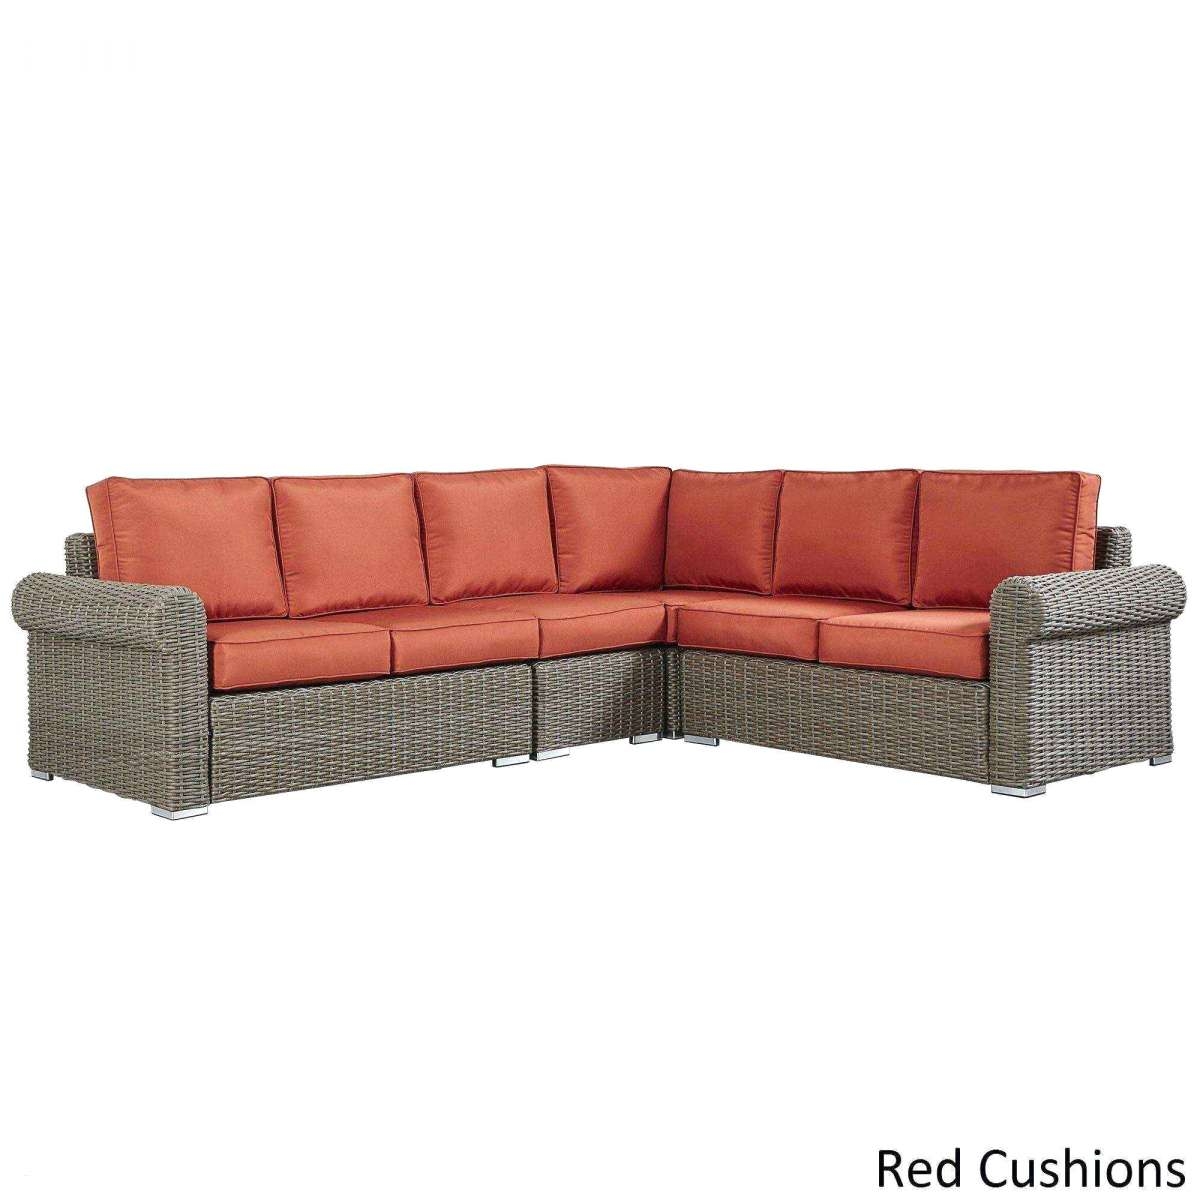 covered patio plans fresh wicker outdoor sofa 0d patio chairs sale awesome balcony lighting ideas